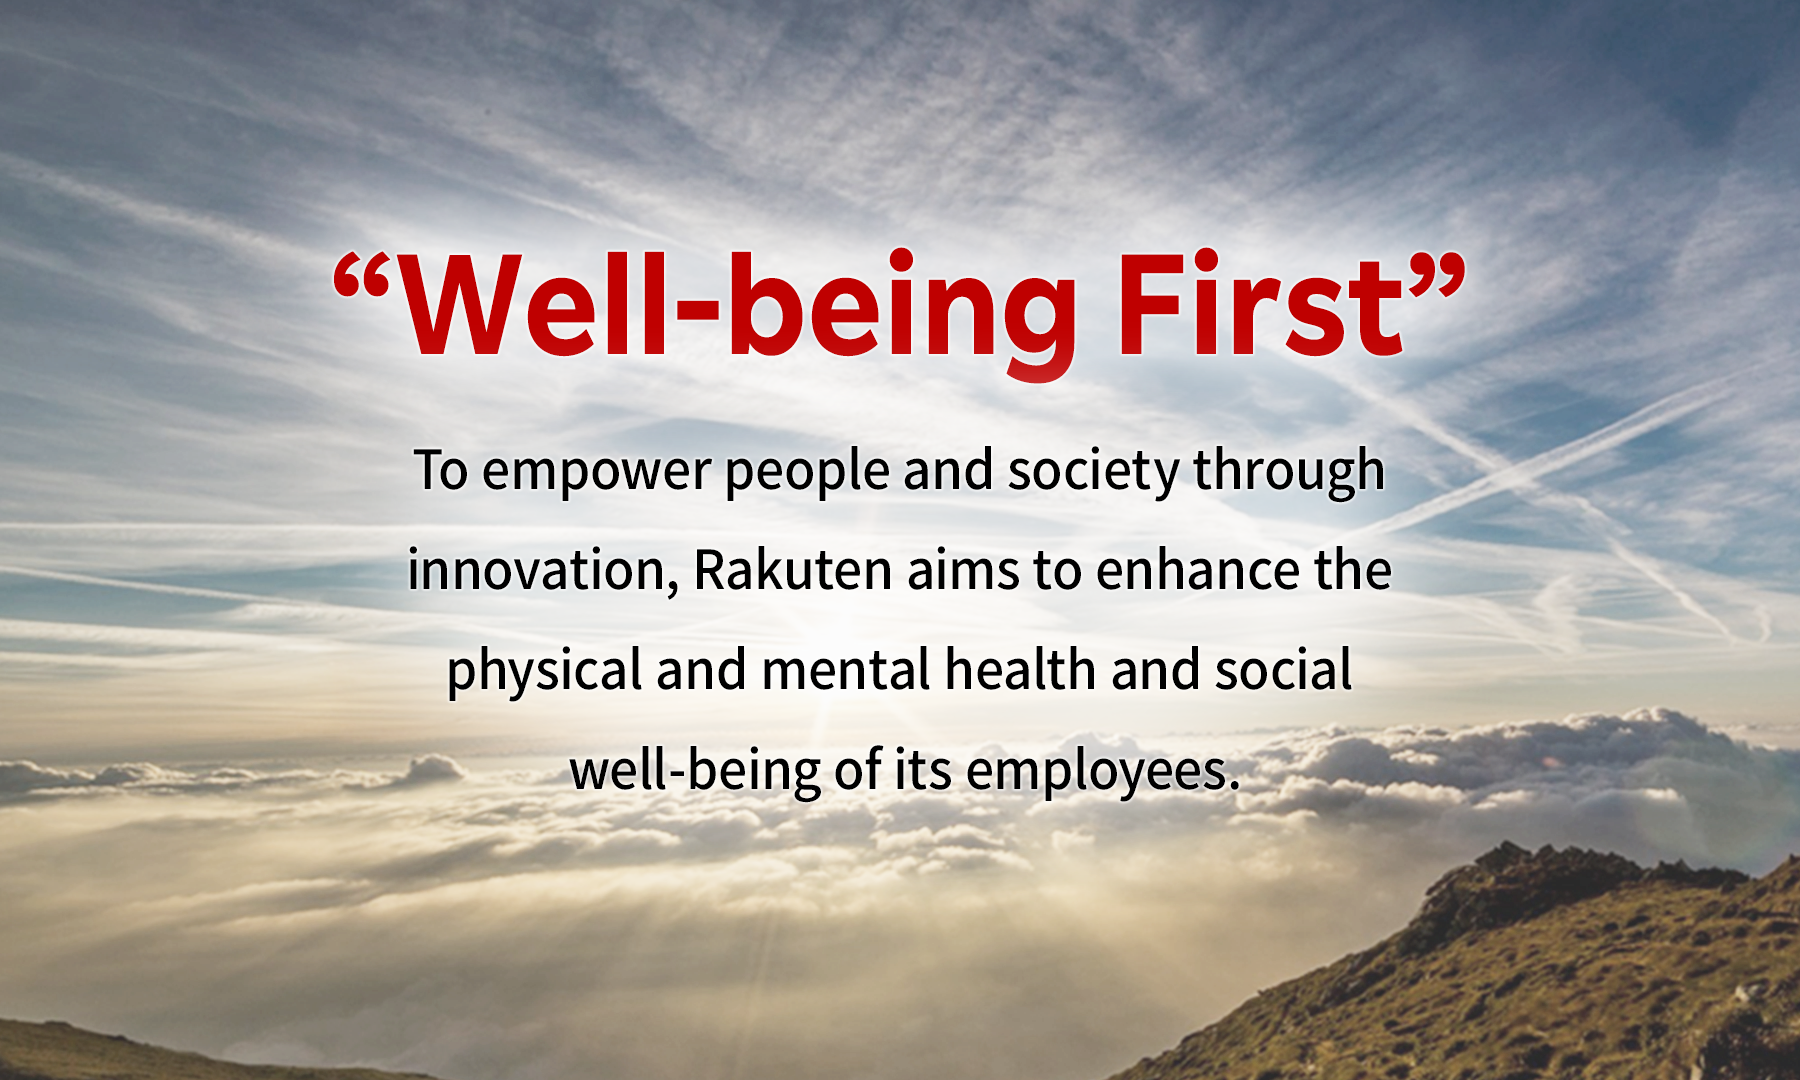 Well-being First